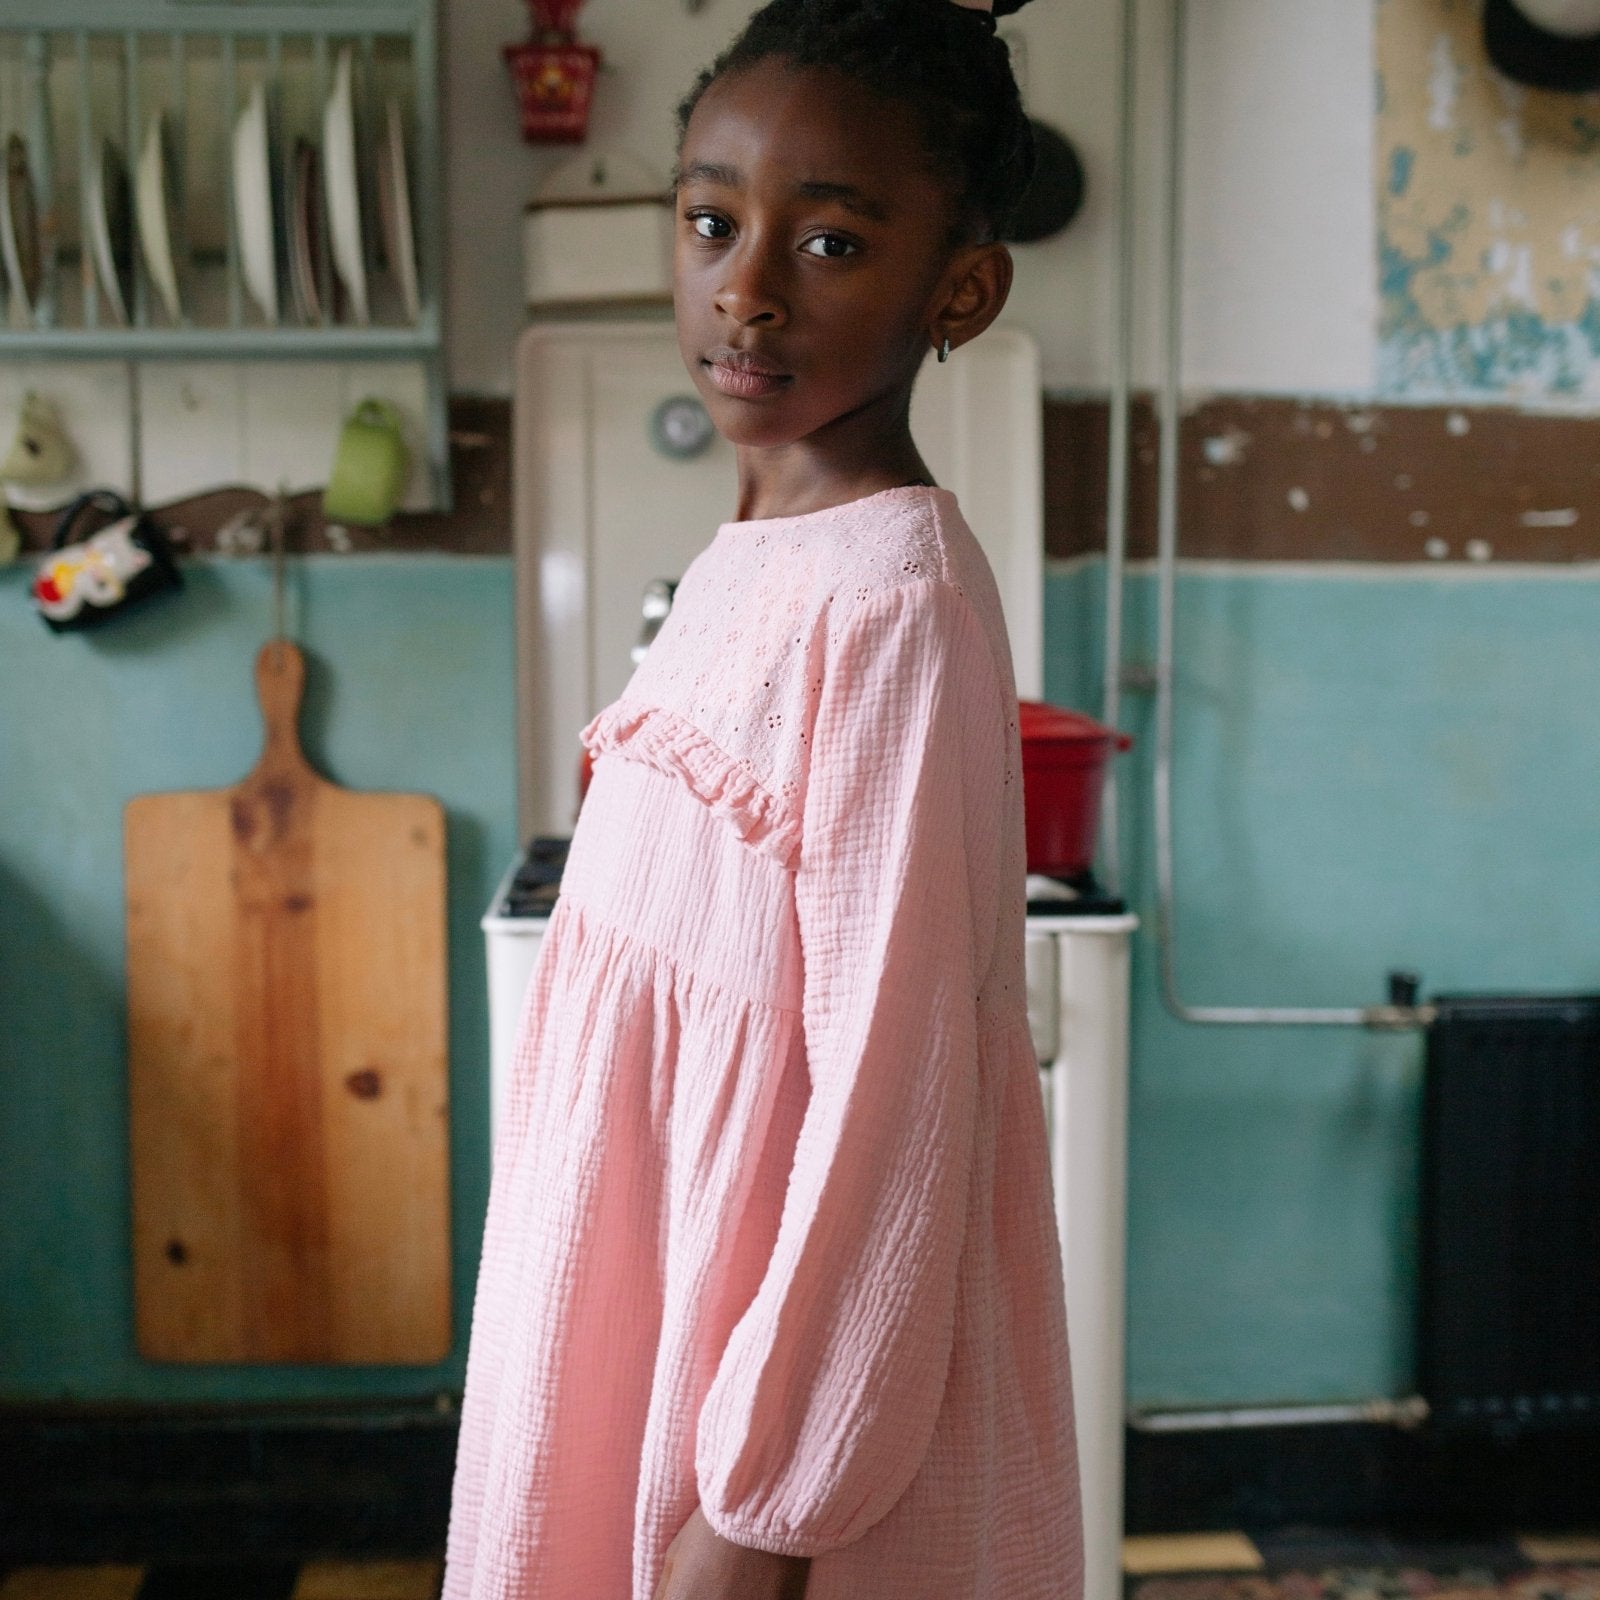 Bonnie Dress - Pale Pink find Stylish Fashion for Little People- at Little Foxx Concept Store